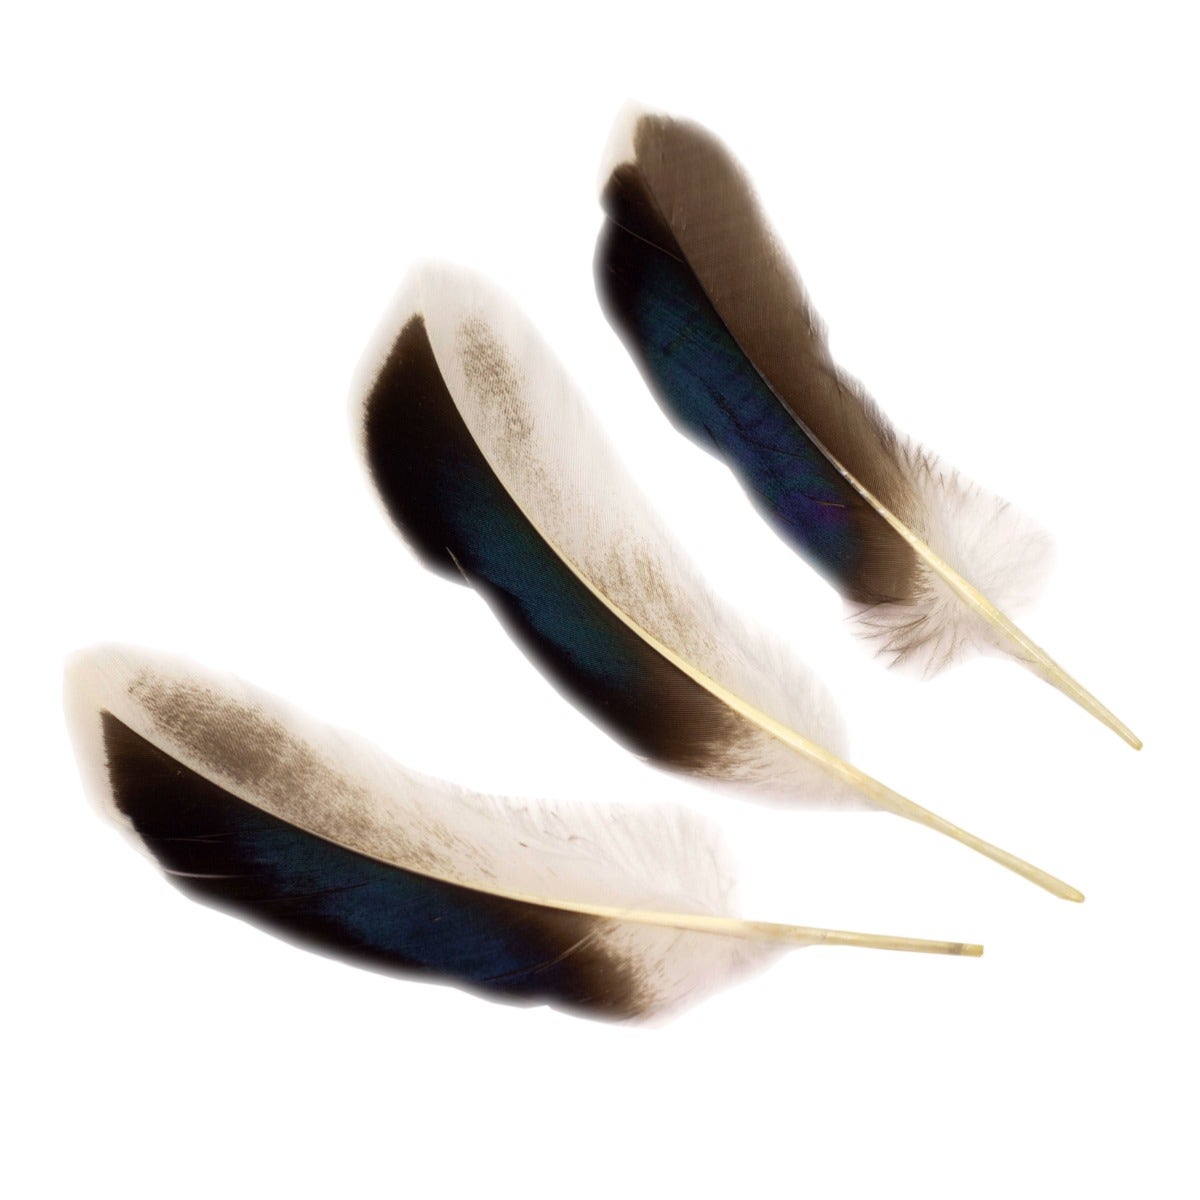 Natural Duck Feathers 3-5" - 10 pcs